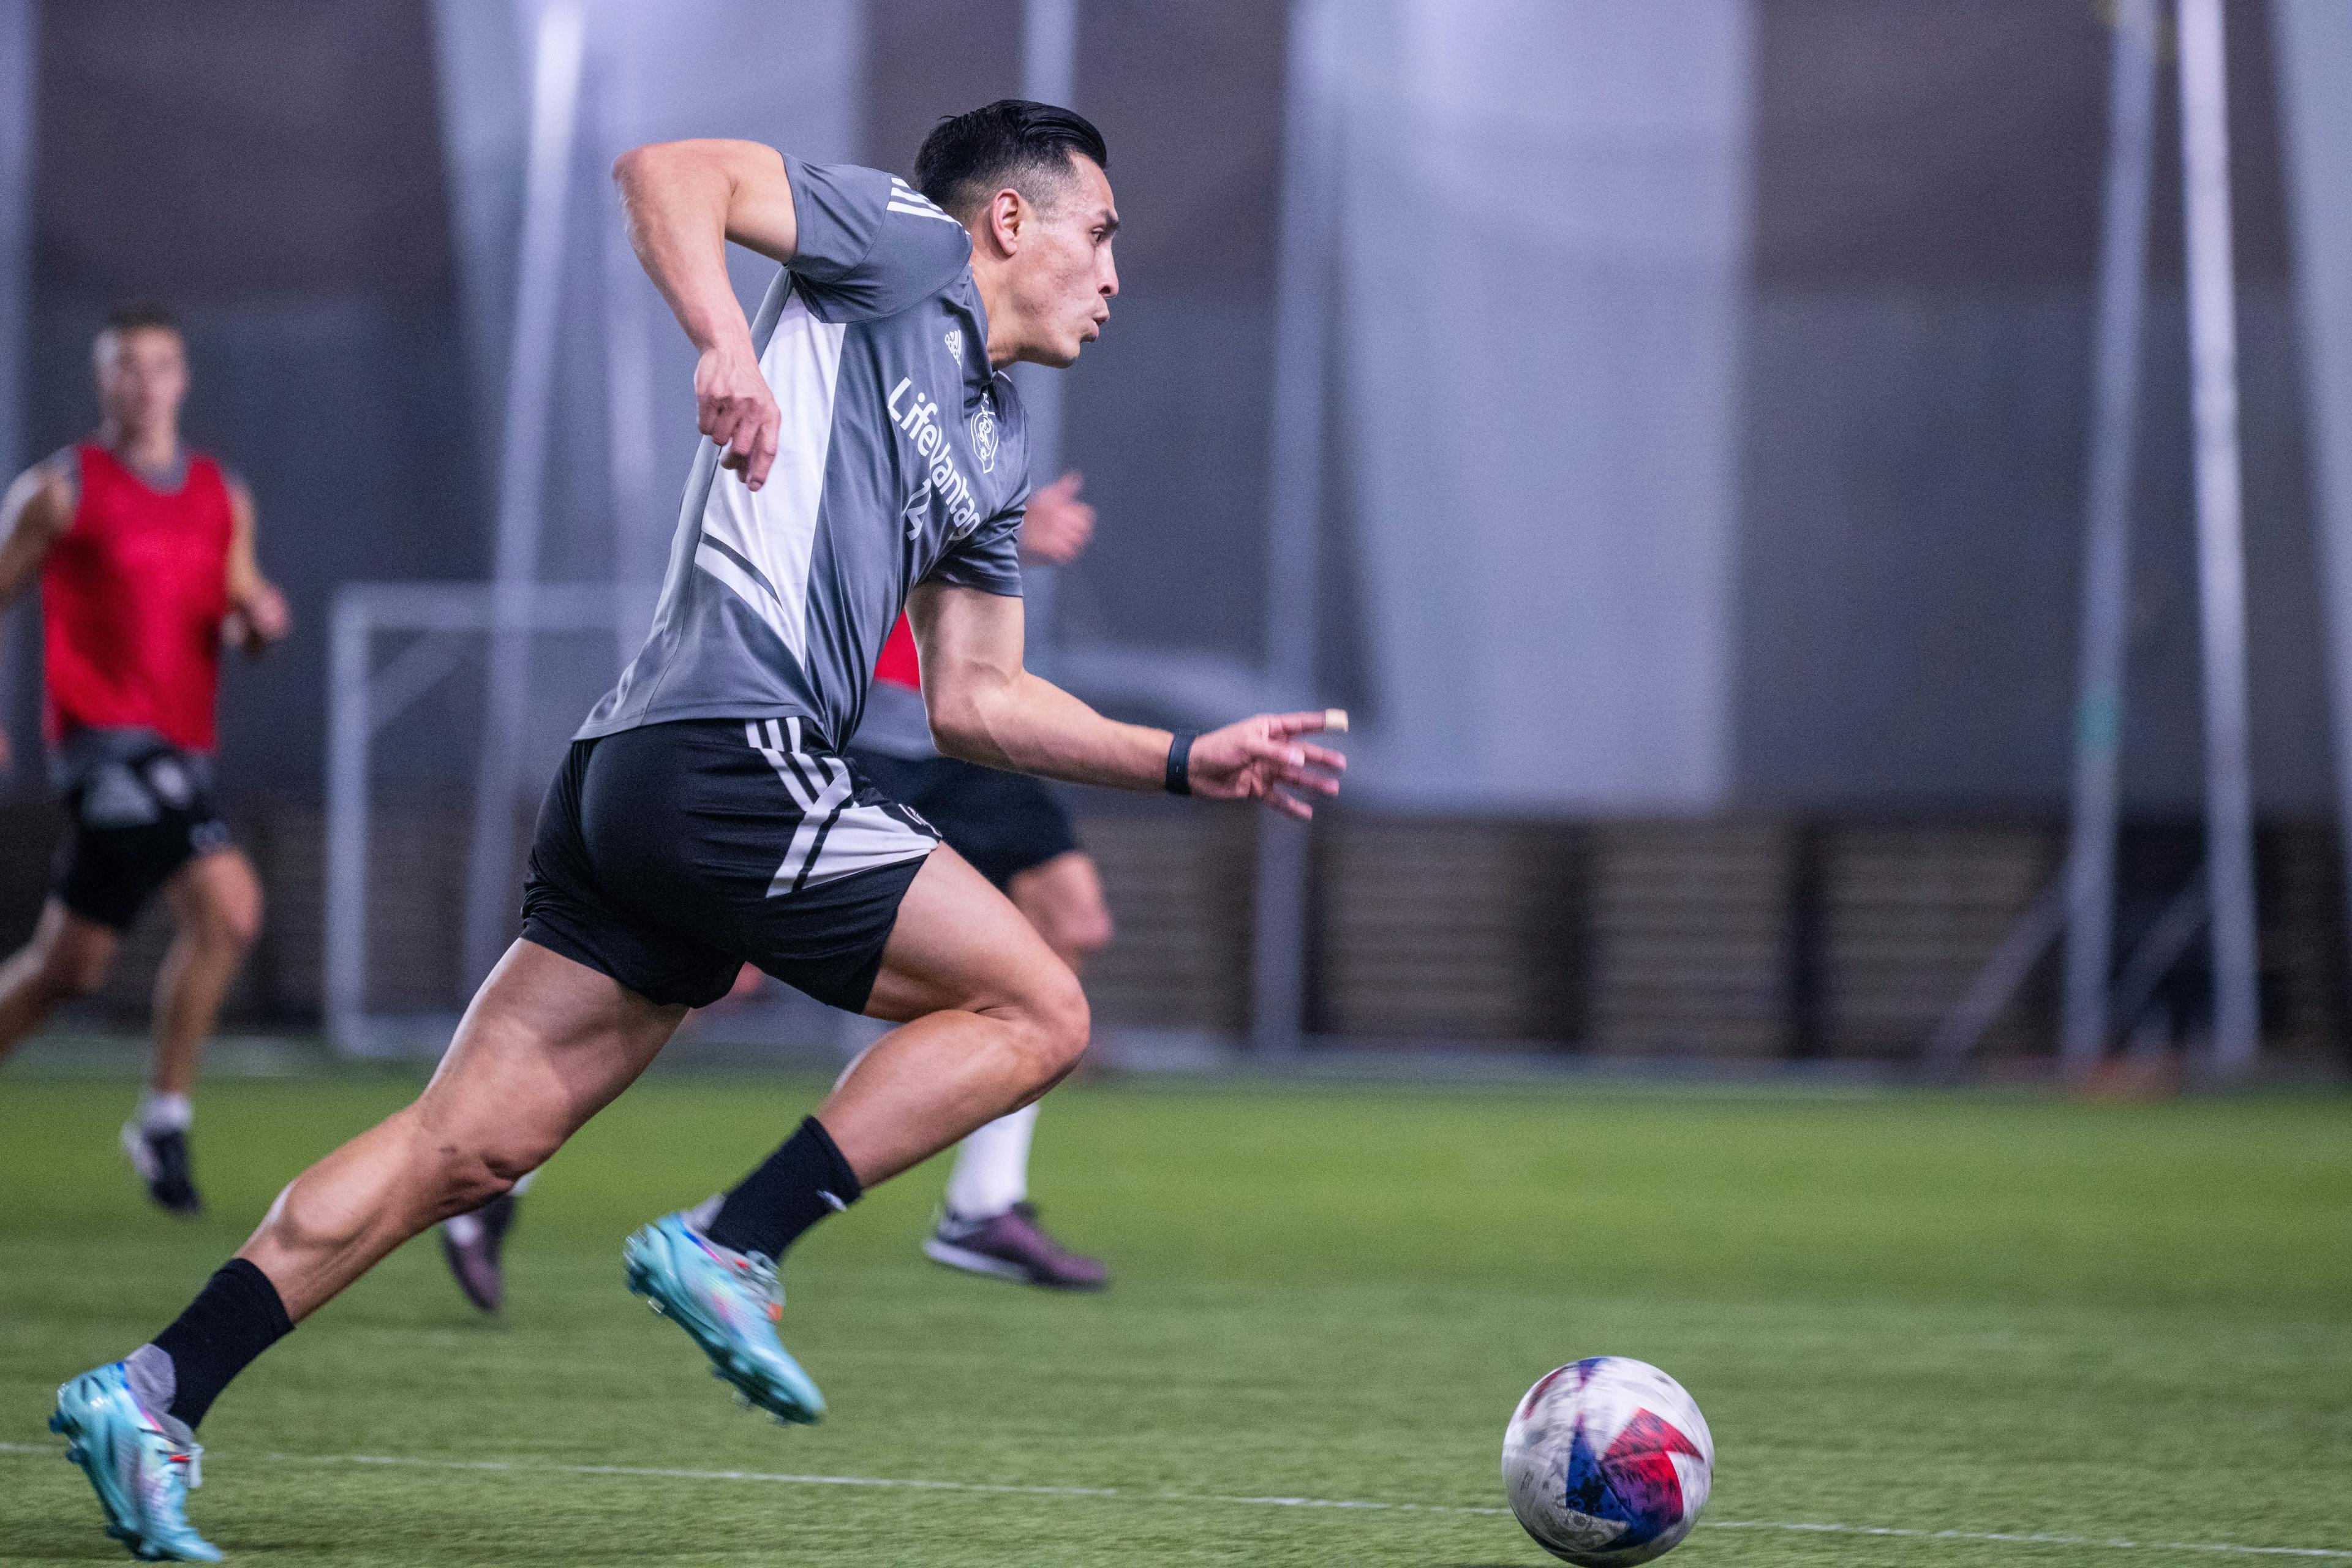 Rubio Rubin running with the ball during a preseason training session.